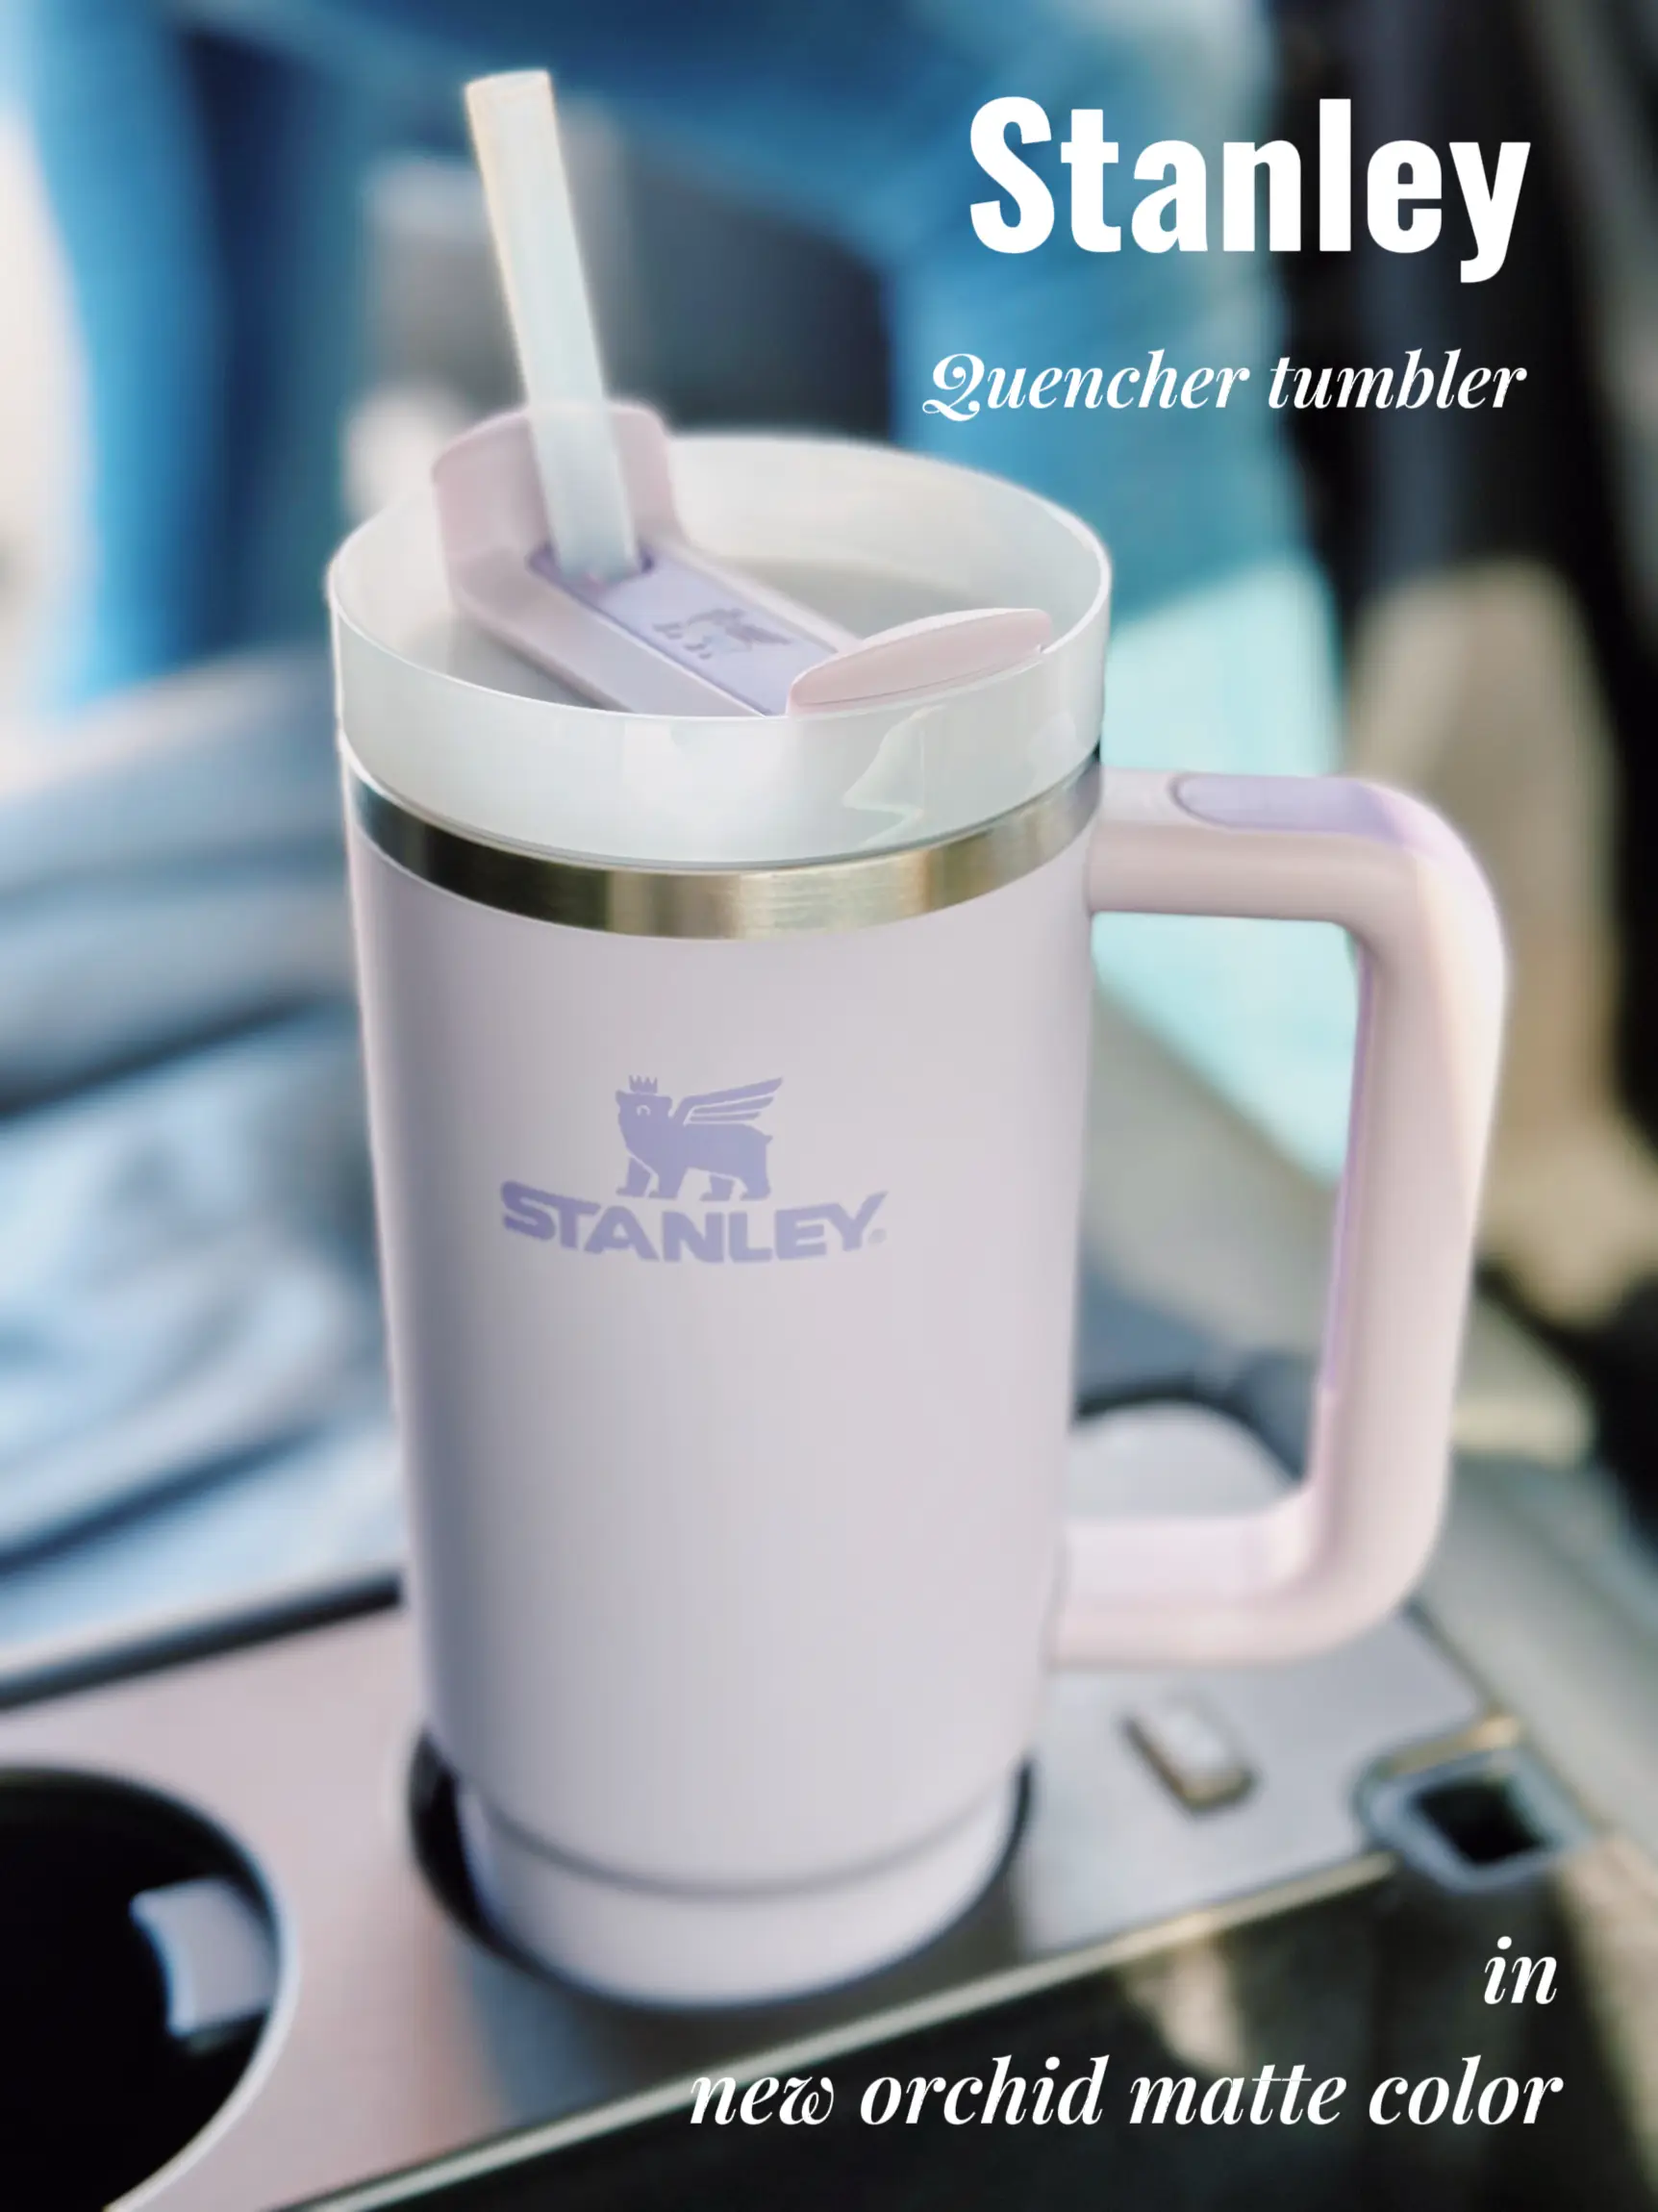 Affordable Fashion on Instagram: 🚨New Stanley Orchid Color is in STOCK!  🚨 Comment “link” and I'll DM you the link right now! Available in 30oz and  40oz Quencher sizes!! #stanleytumbler I love